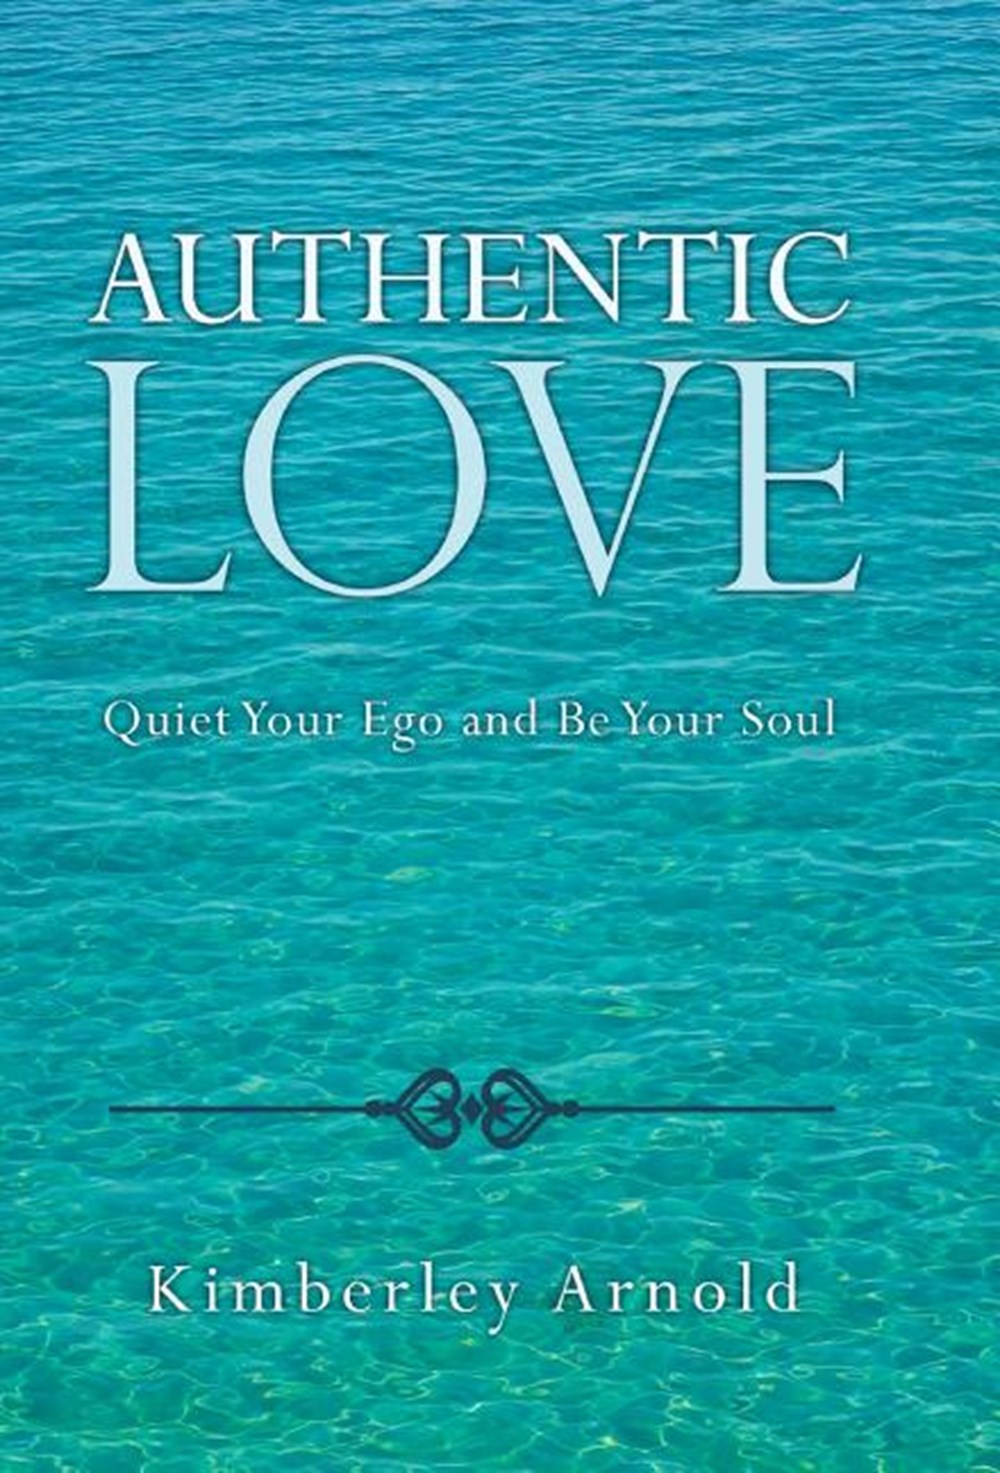 Authentic Love: Quiet Your Ego and Be Your Soul